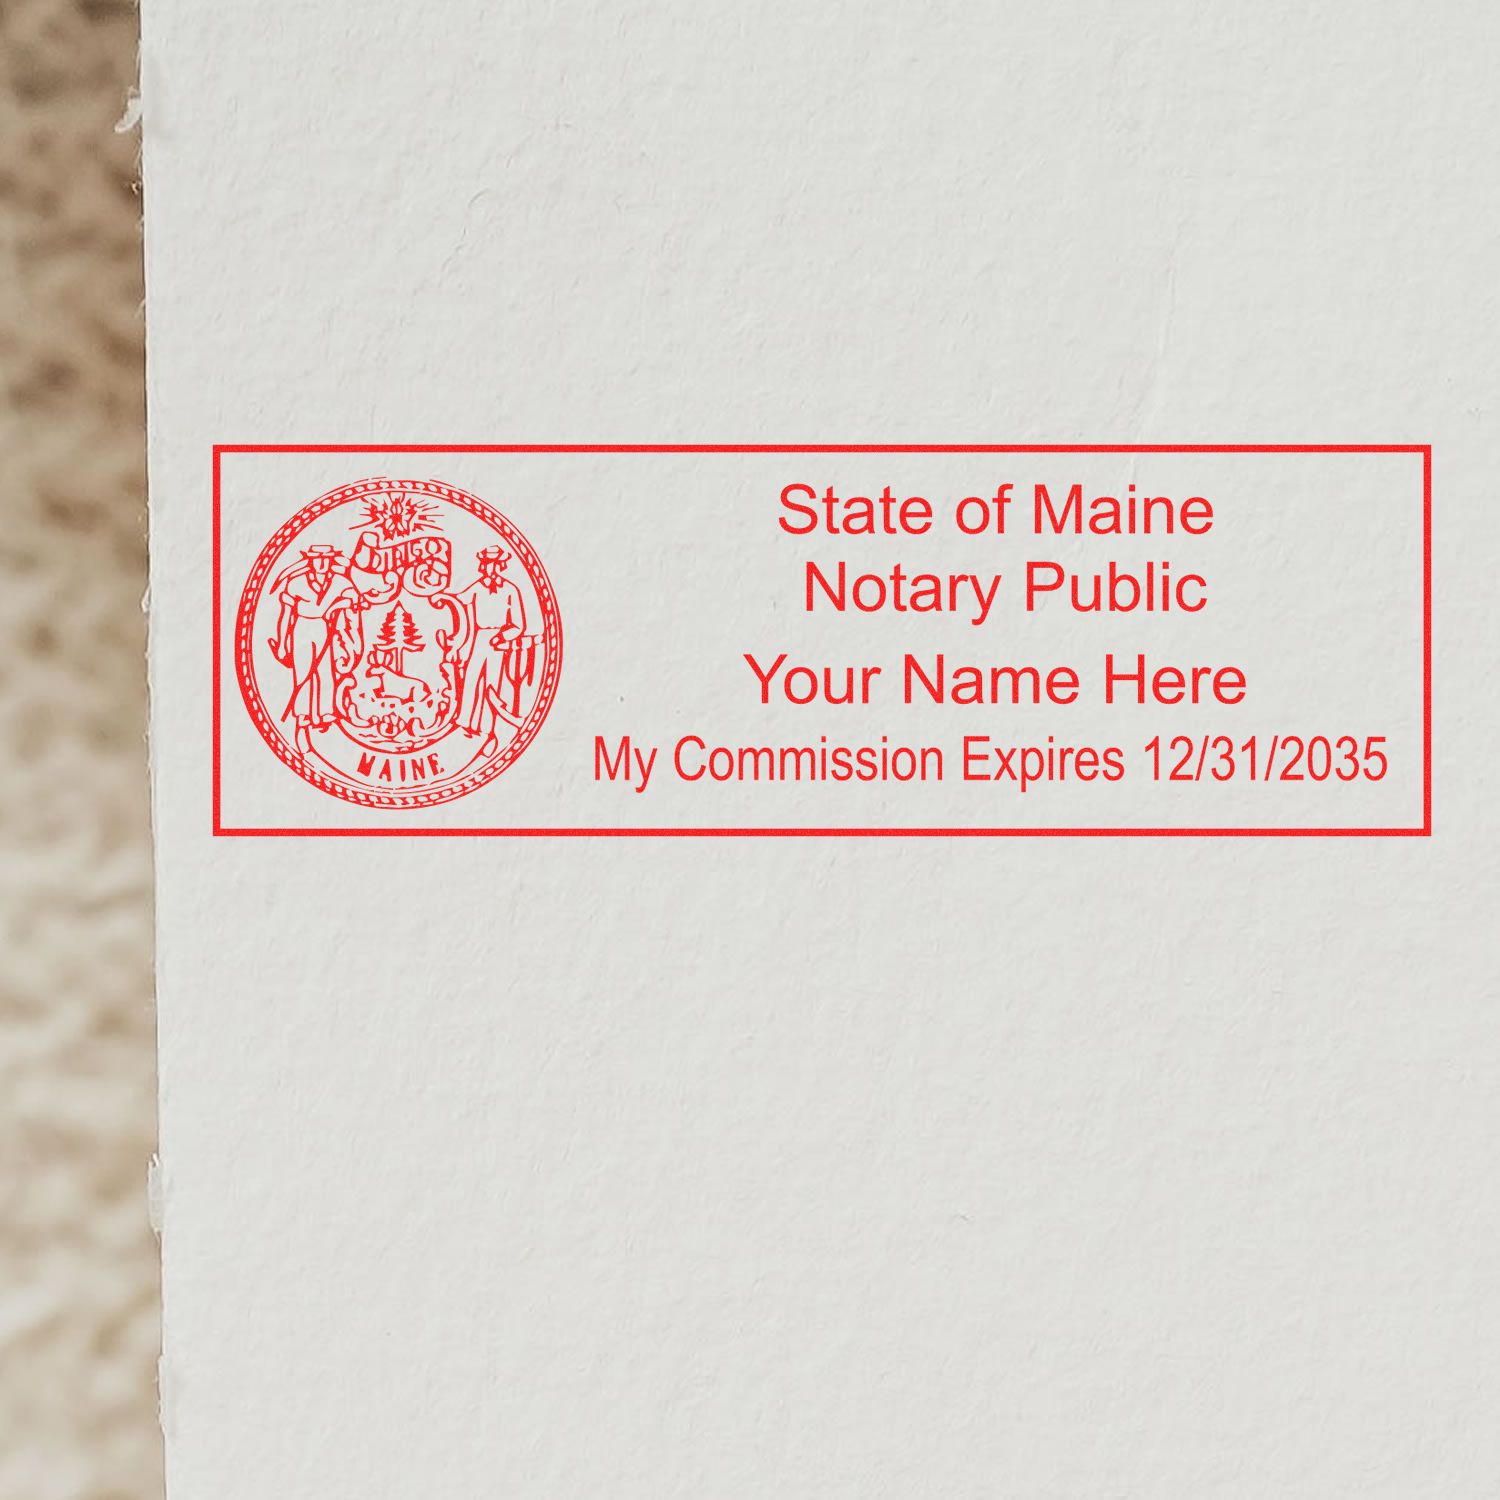 A stamped impression of the PSI Maine Notary Stamp in this stylish lifestyle photo, setting the tone for a unique and personalized product.